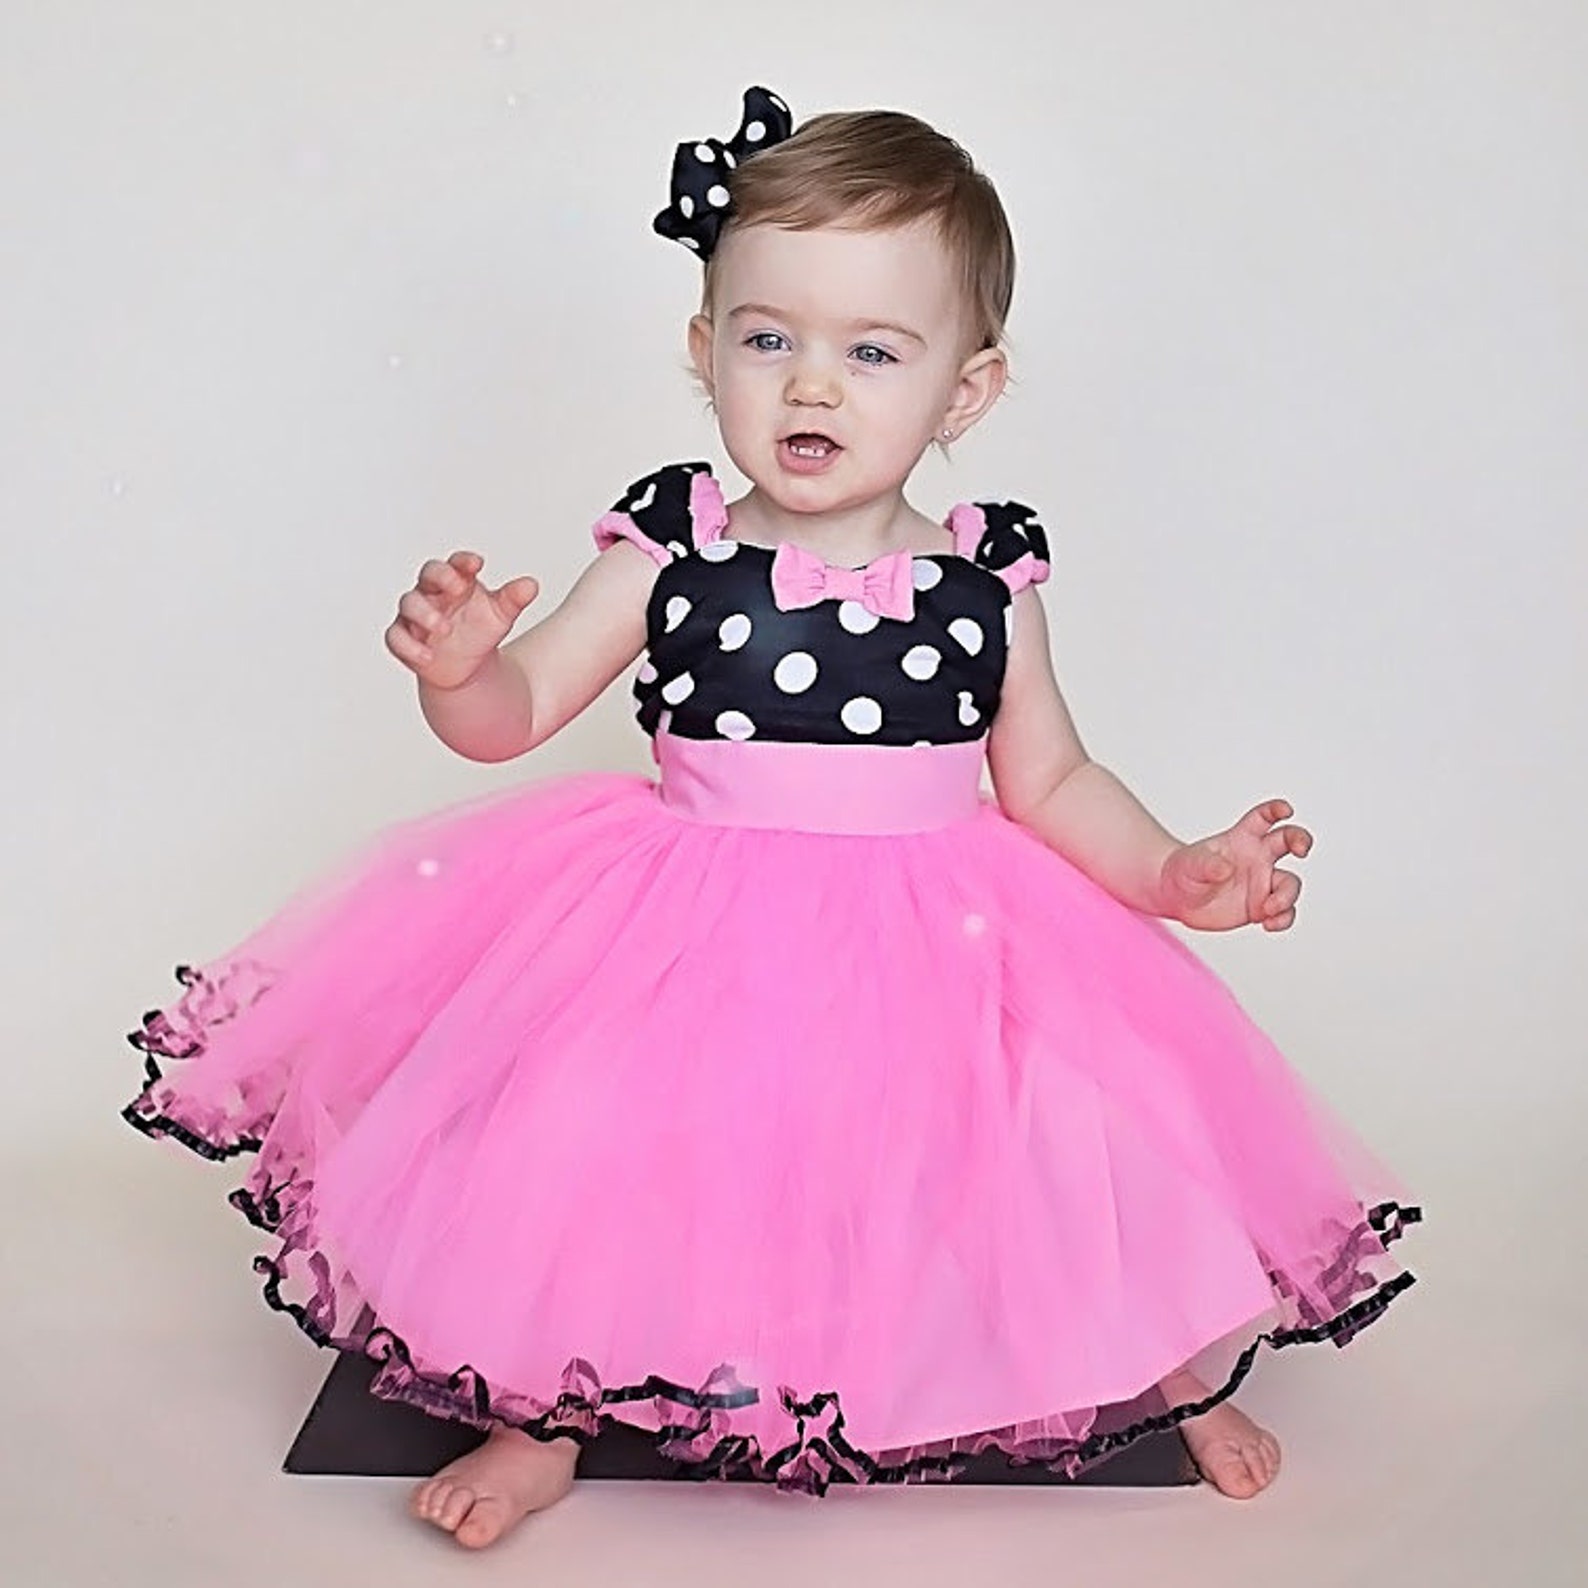 MINNIE MOUSE Dress TUTU Minnie Mouse Party Dress in Hot Pink - Etsy